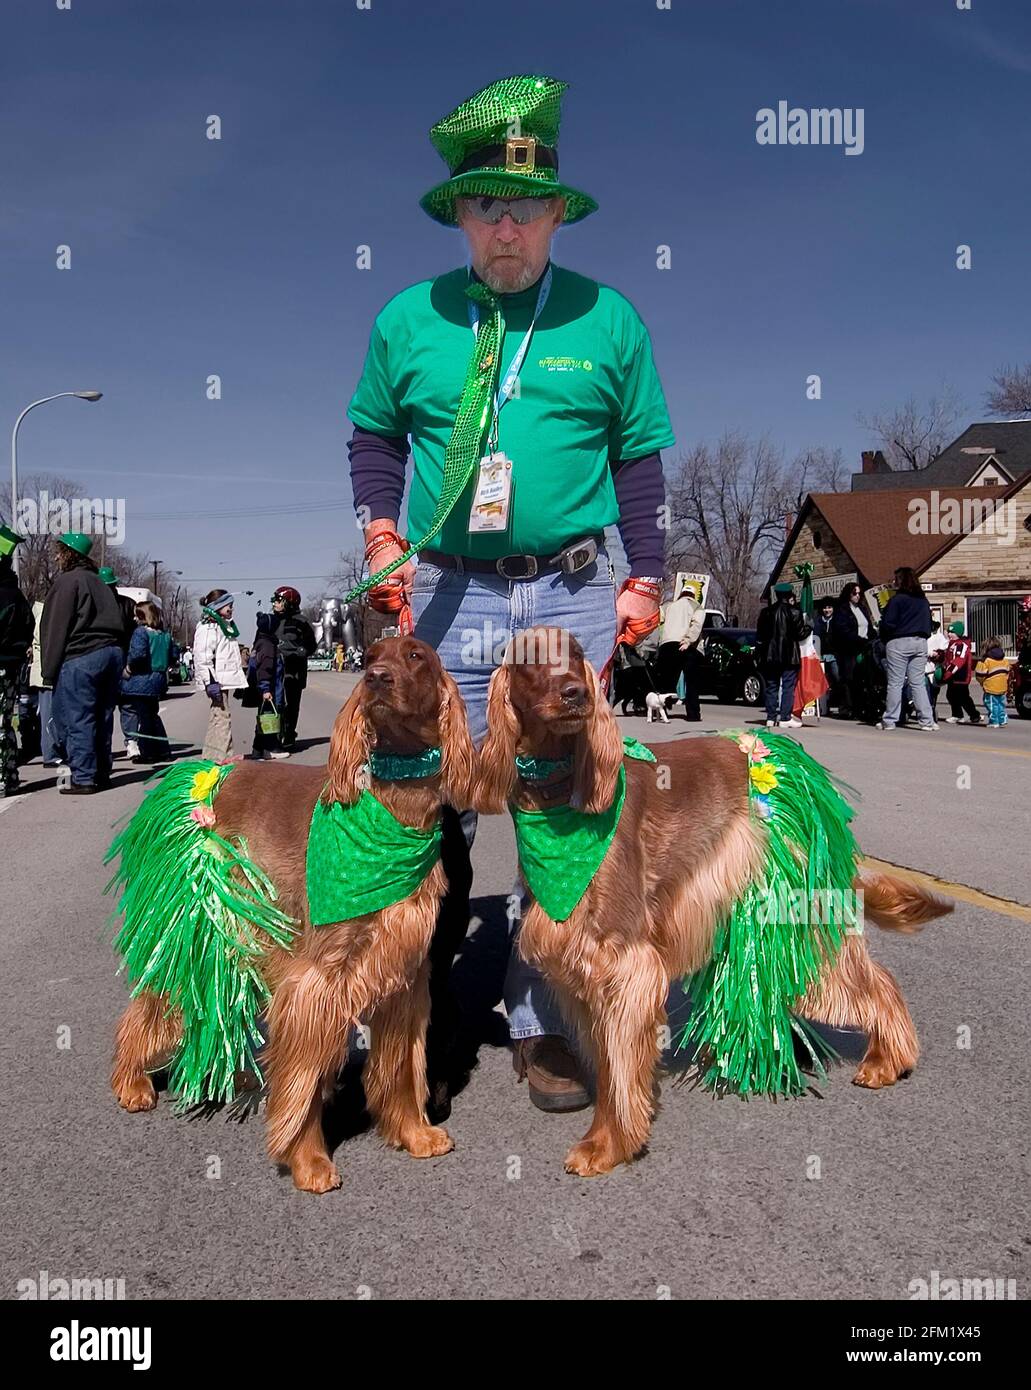 Activities at a Saint Patrick's Day Parade in Port Huron, Michigan male with irish setters dressed in green Stock Photo